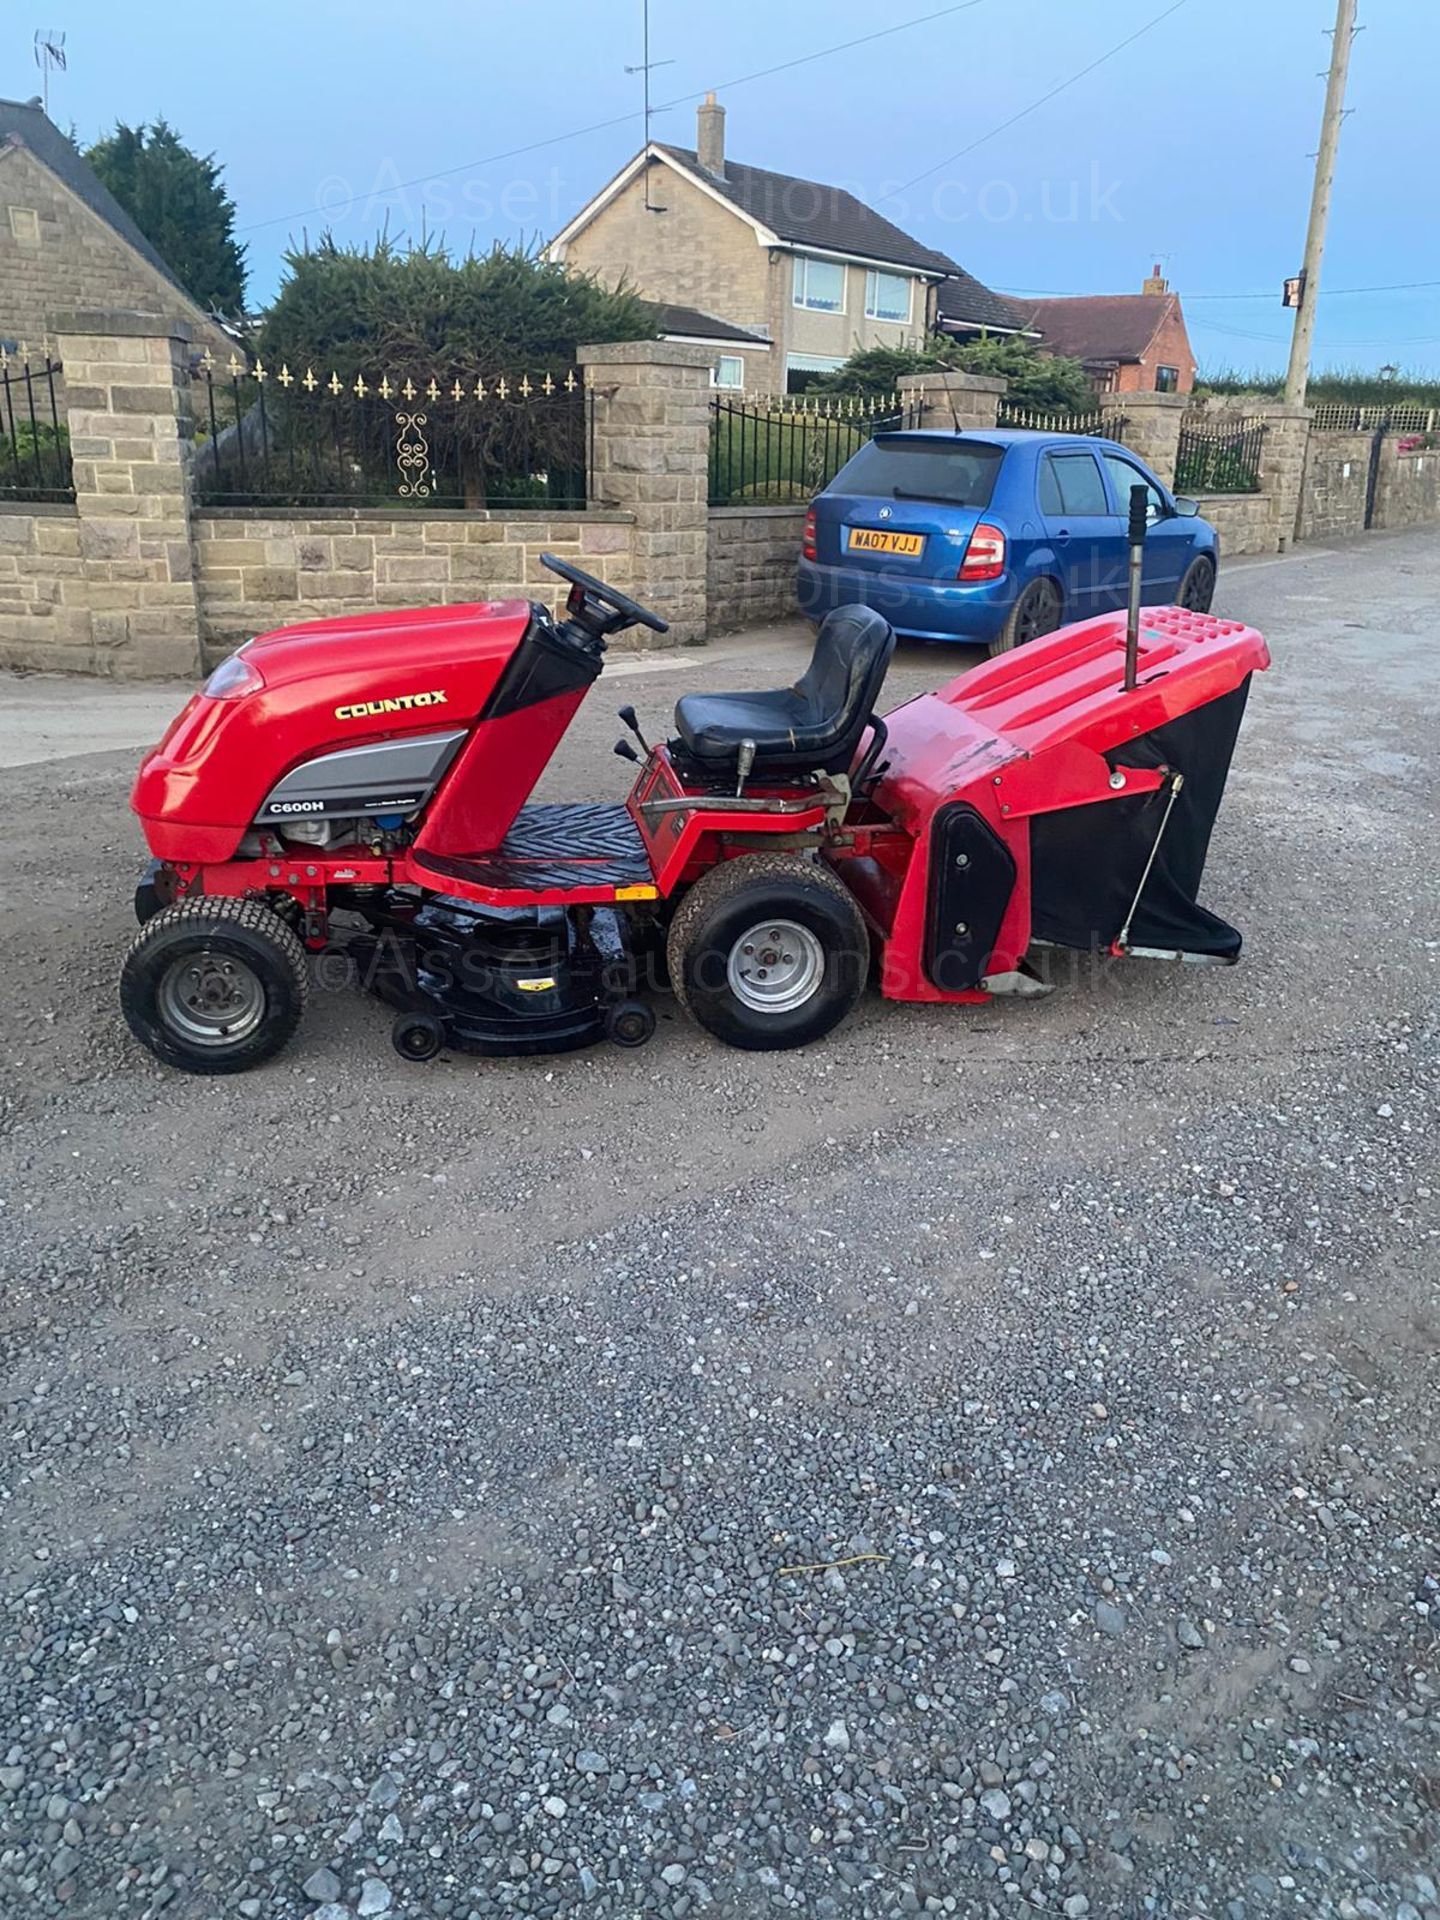 COUNTAX C600H RIDE ON LAWN MOWER, 4 WHEEL DRIVE, CUTS AND COLLECTS *NO VAT* - Image 5 of 7